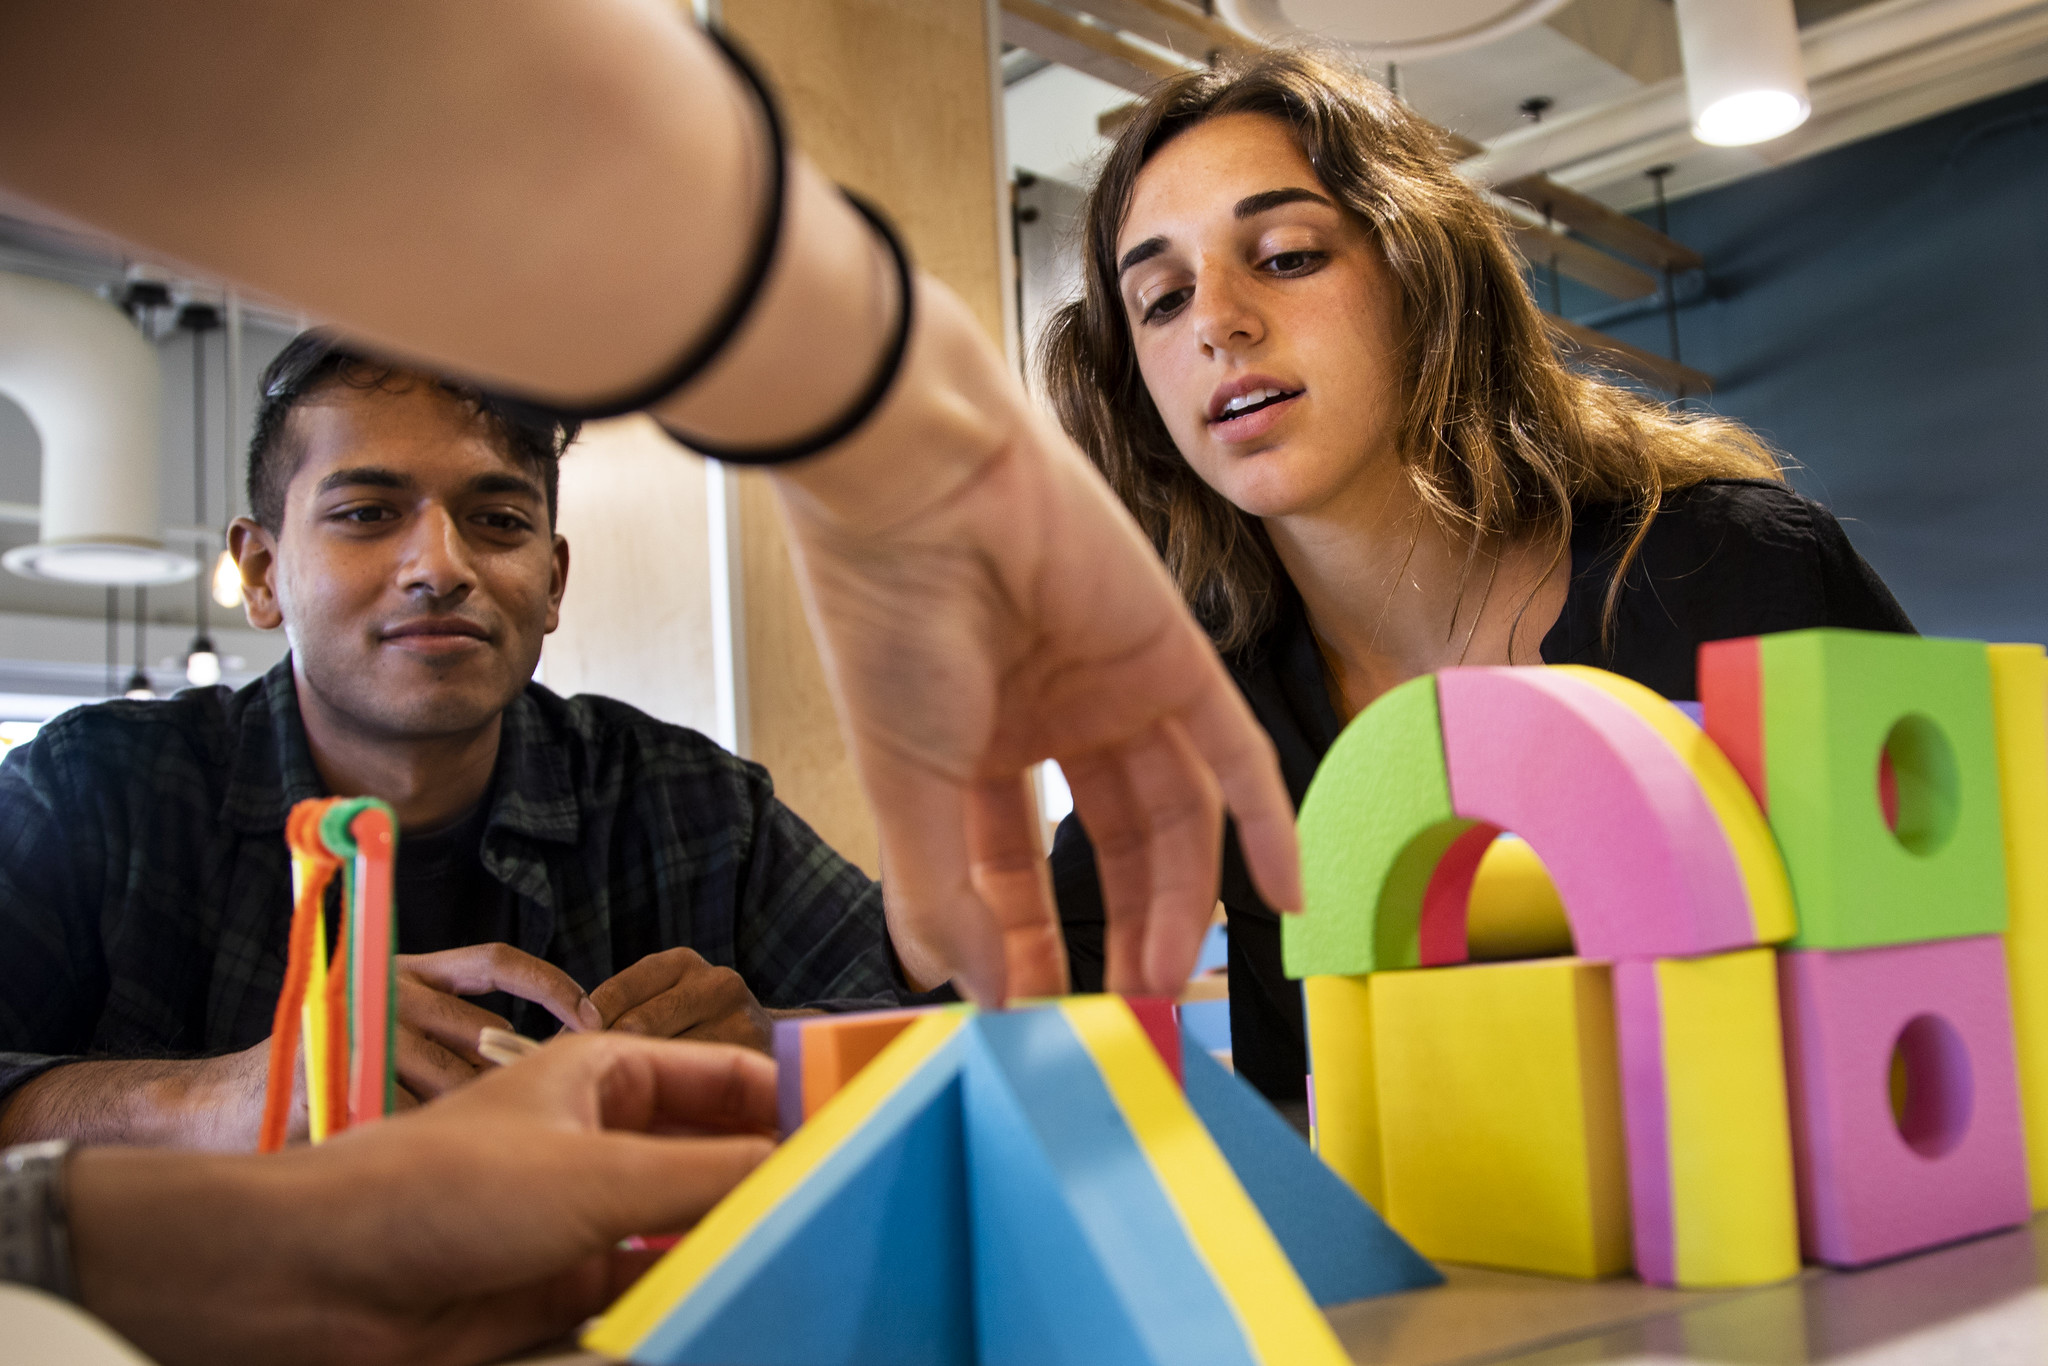 Front view of hand placing a colorful block while other students observe